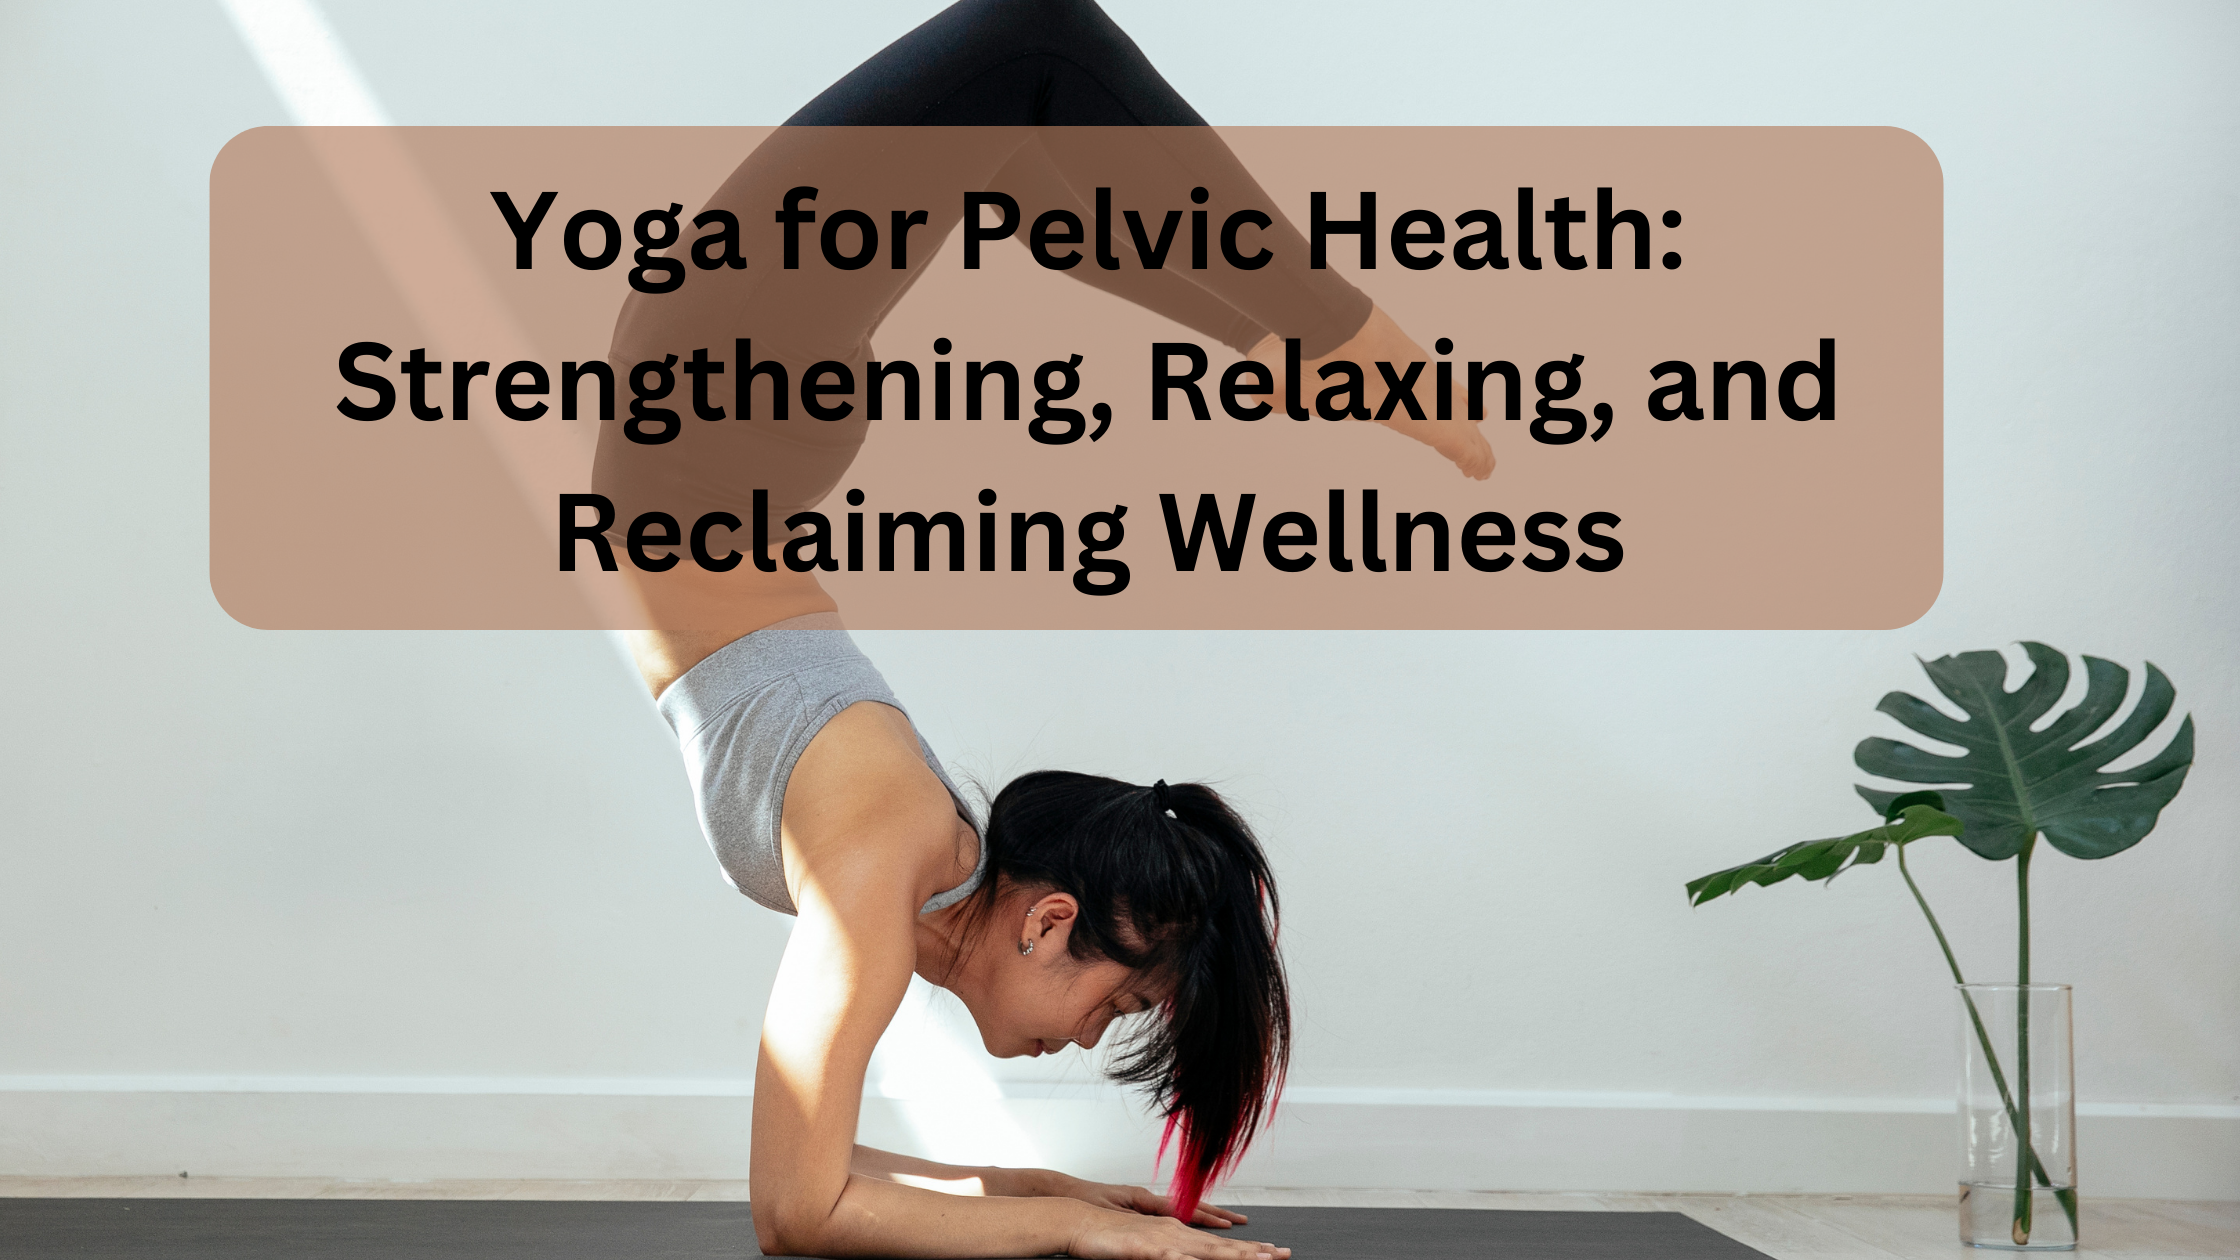 yoga for pelvic health strengthening, relaxing, and reclaiming wellness